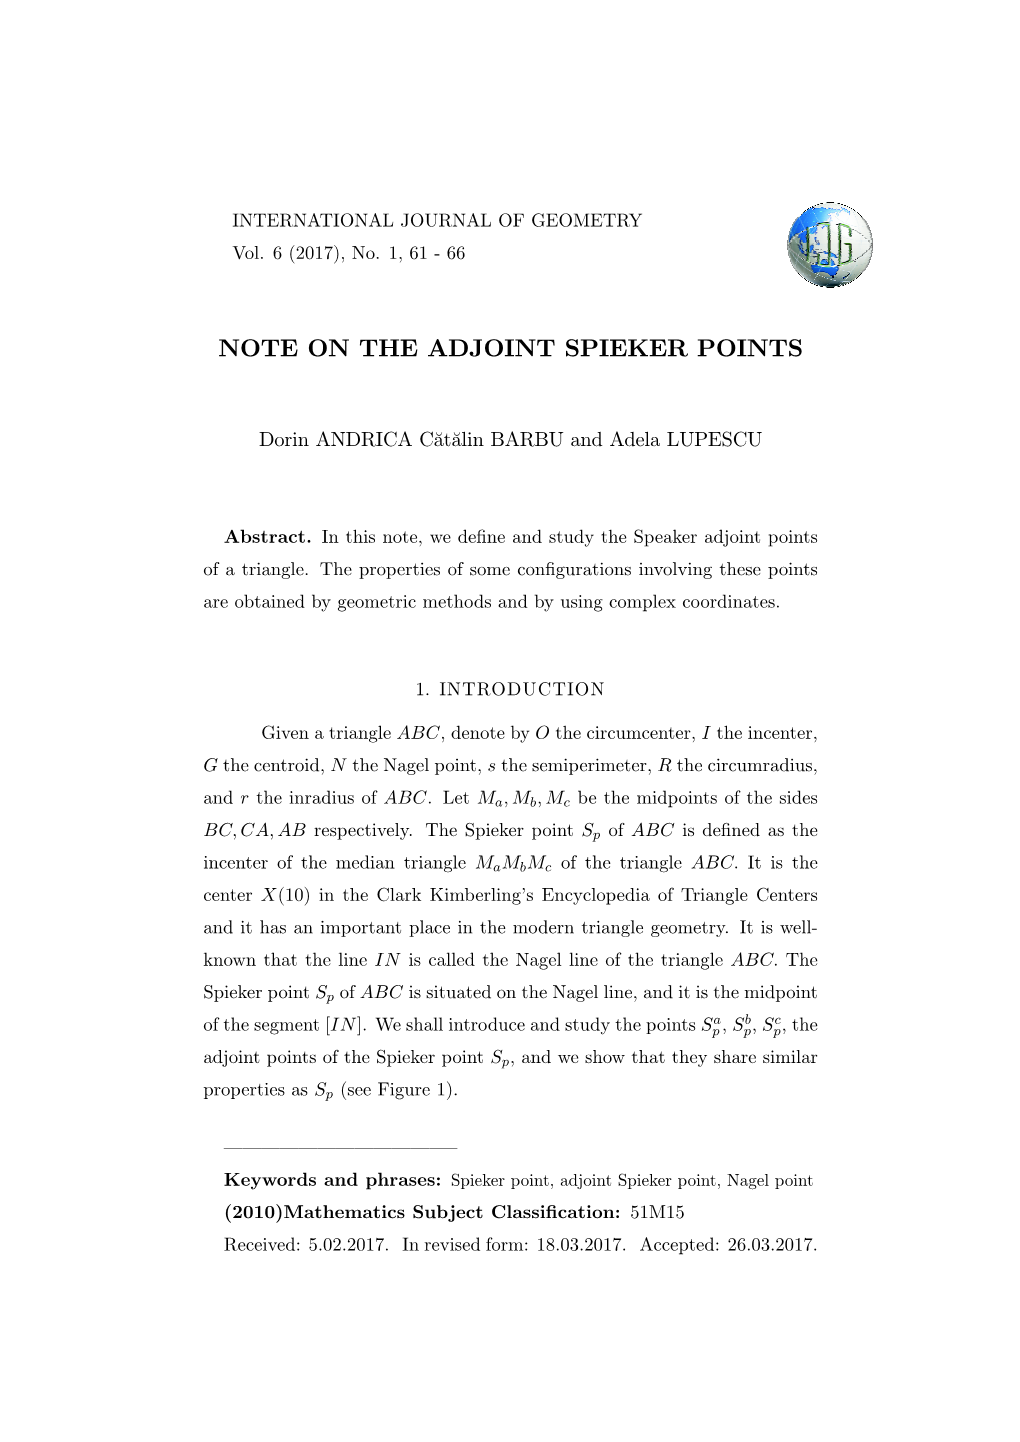 Note on the Adjoint Spieker Points